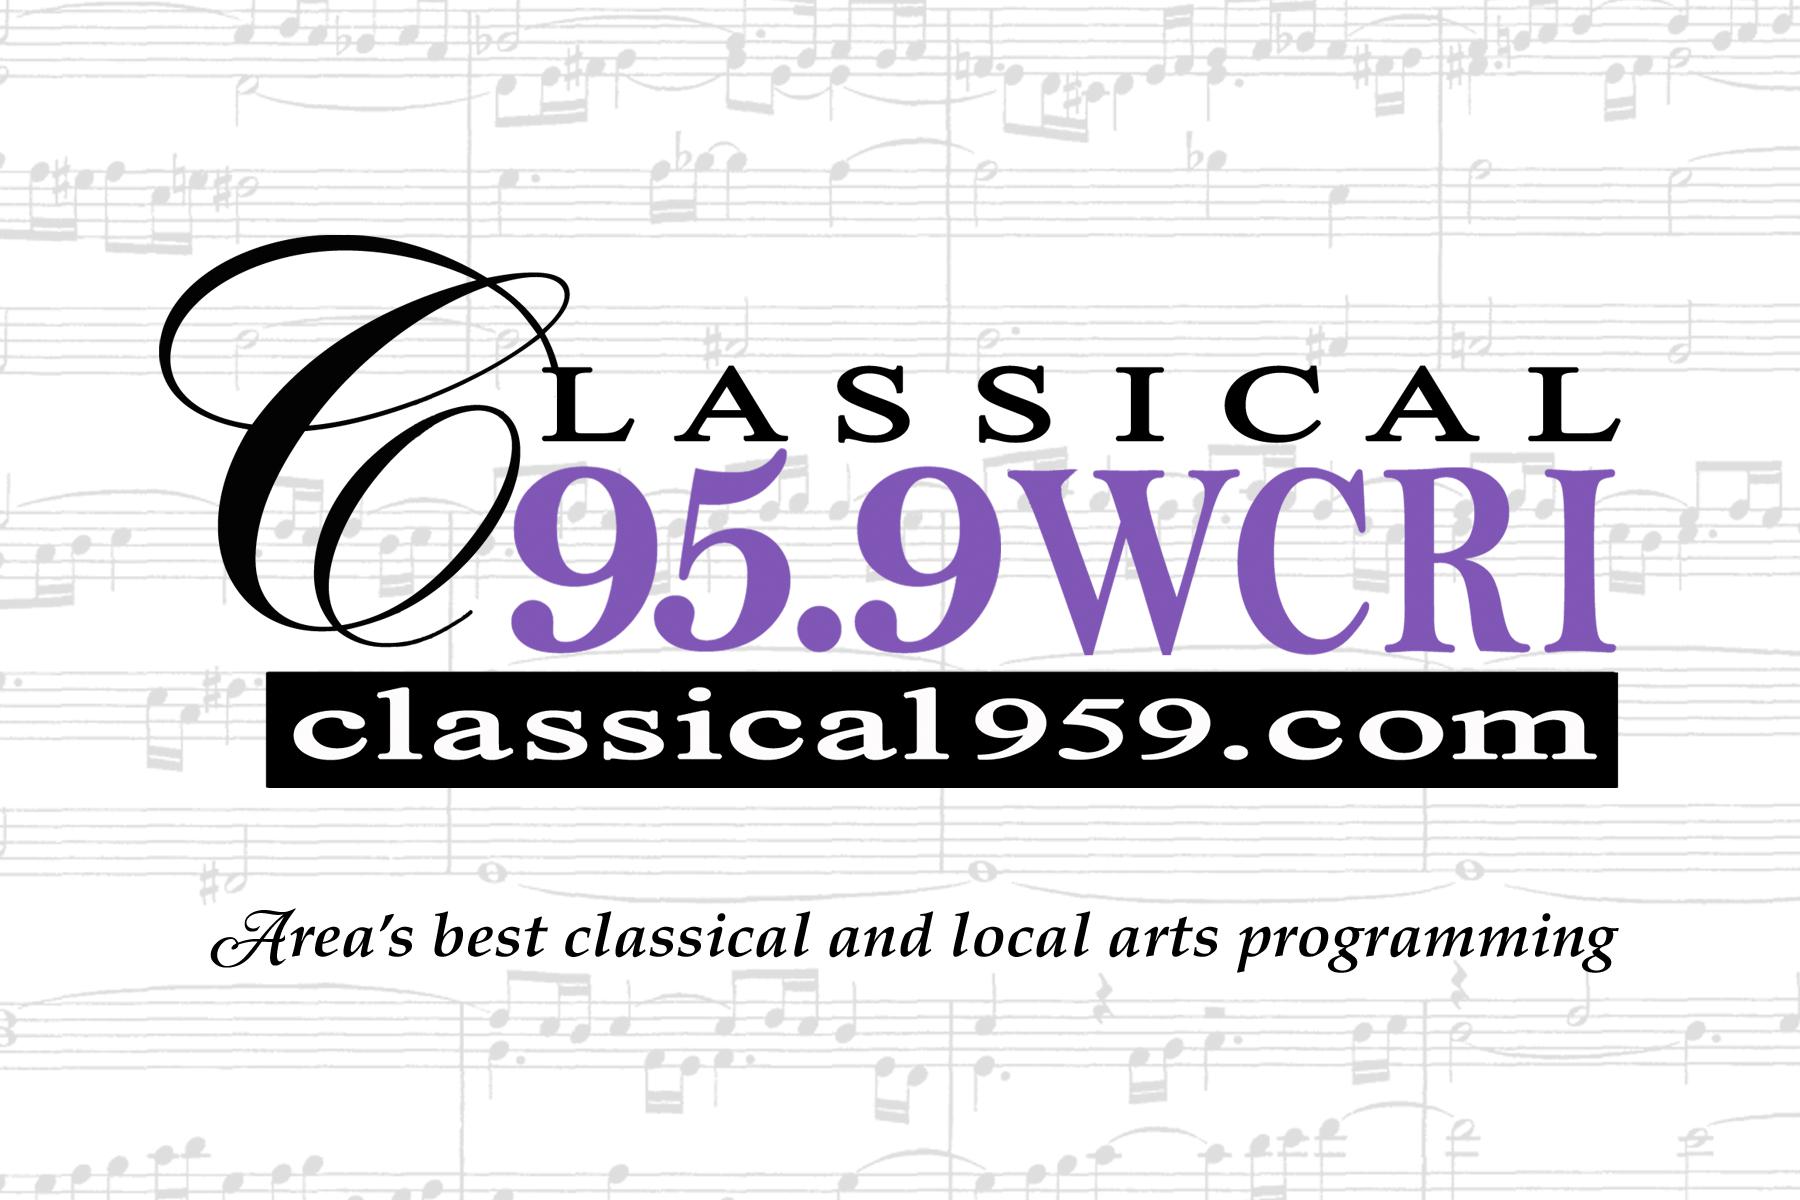 11-12-17   NMF and The Music of Aaron Copland -  WCRI’s Festival Series featuring The Newport Music Festival